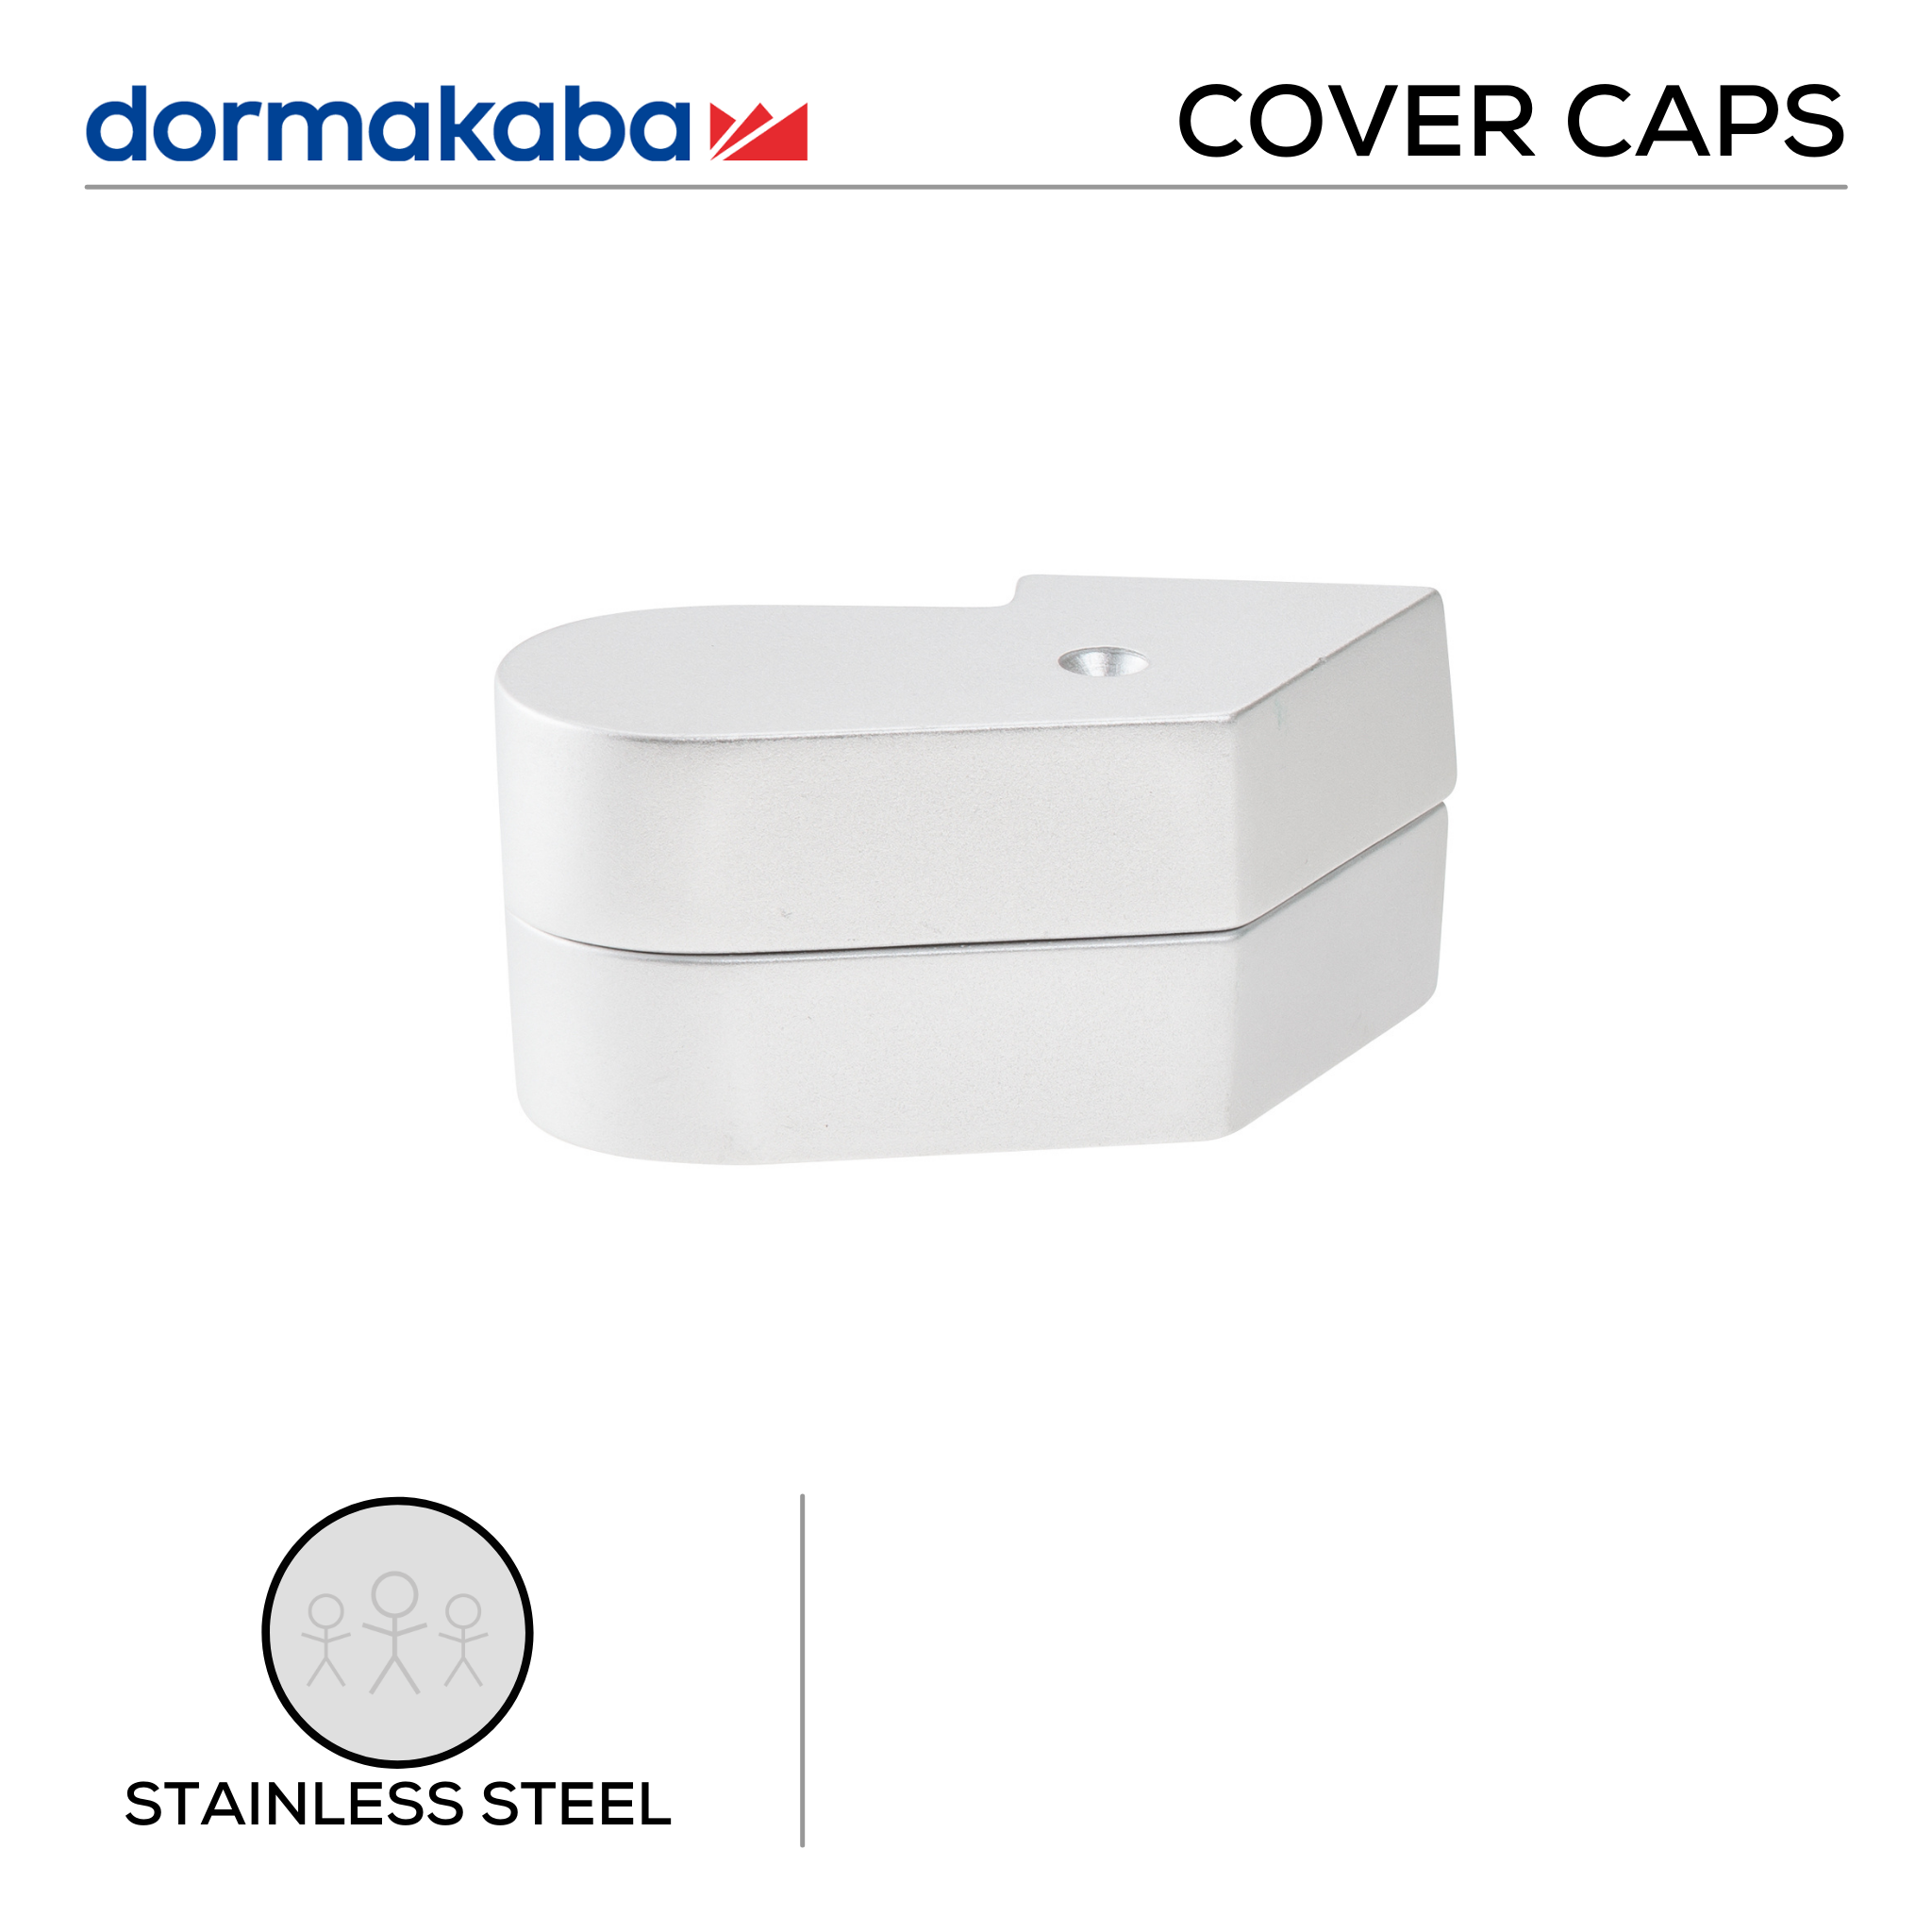 7483, Top Centre Cover Caps , Single Action, Stainless Steel, DORMAKABA